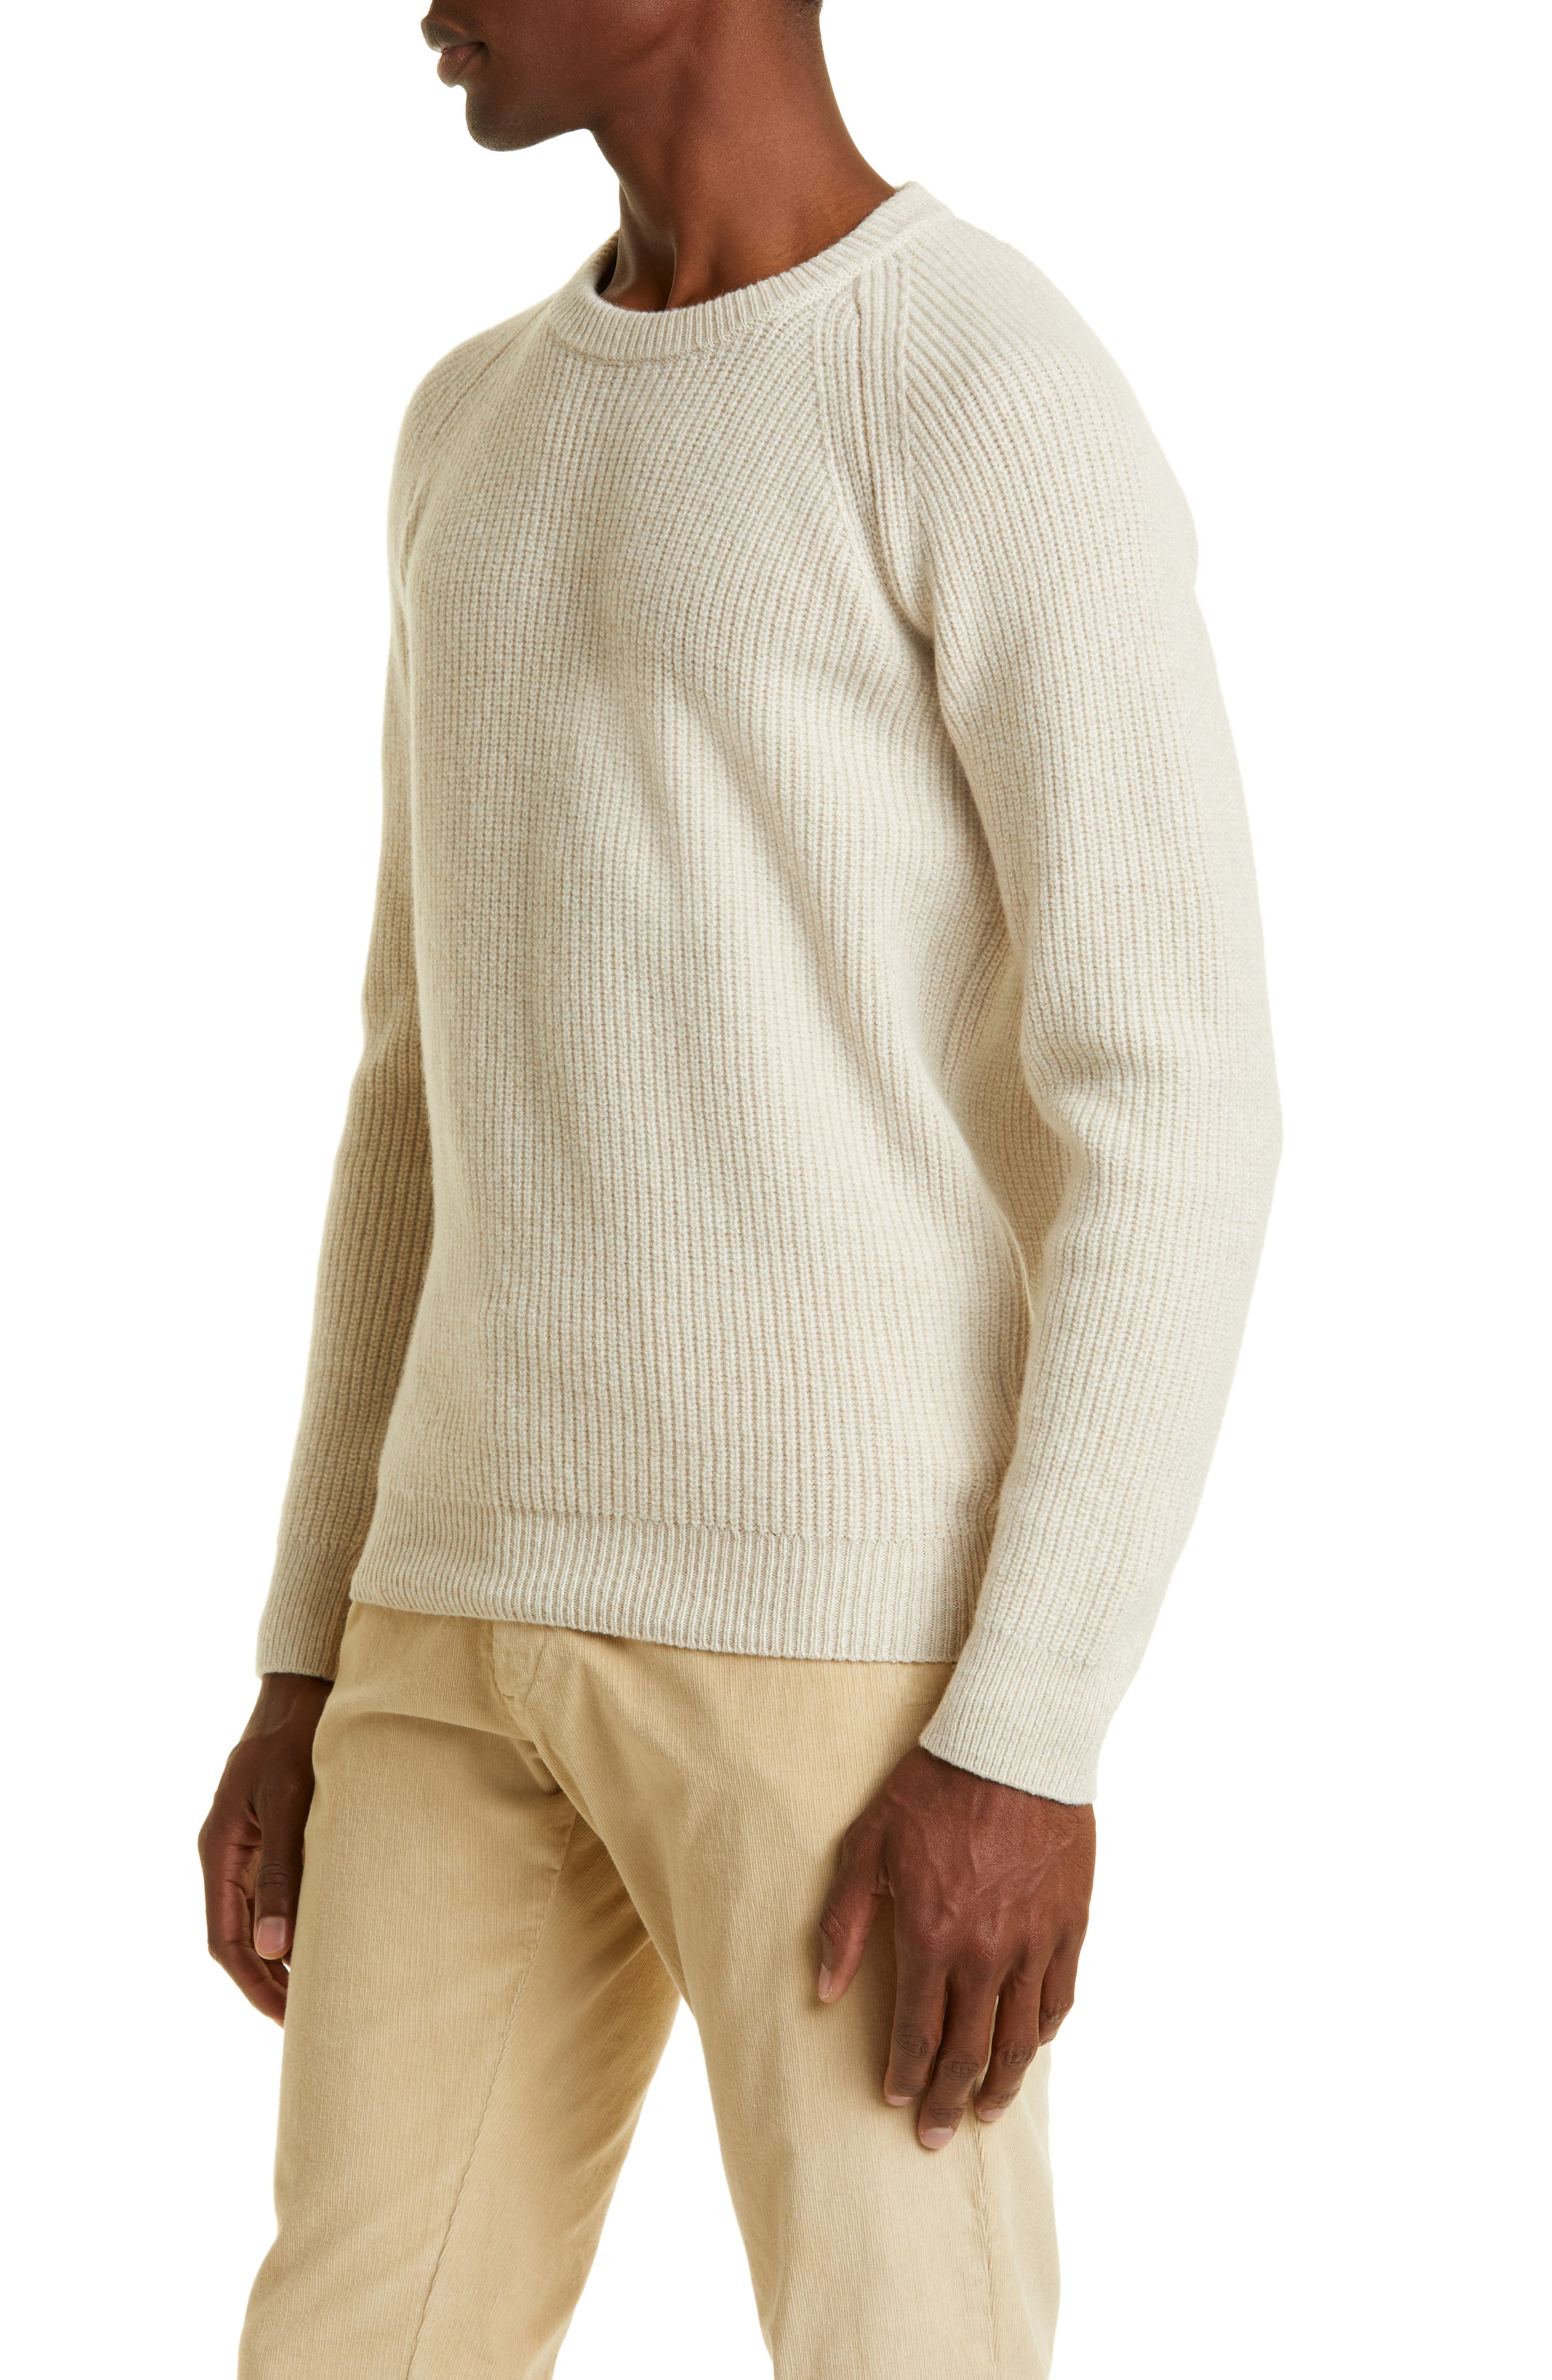 John Smedley Upson Crewneck Recycled Cashmere & Wool Sweater in